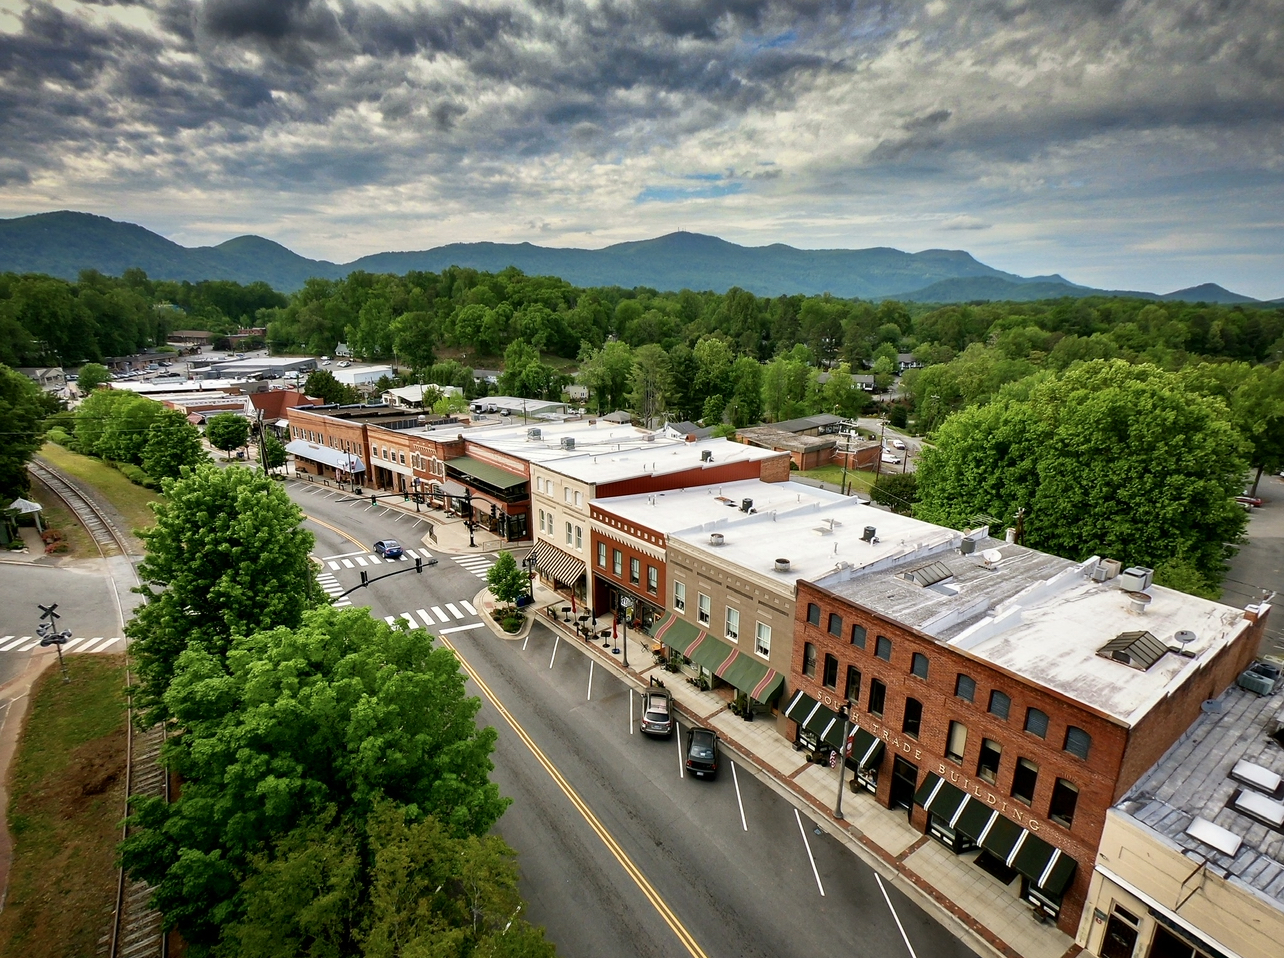 Tryon, NC – “The Friendliest Town In The South.” Find Out Why.